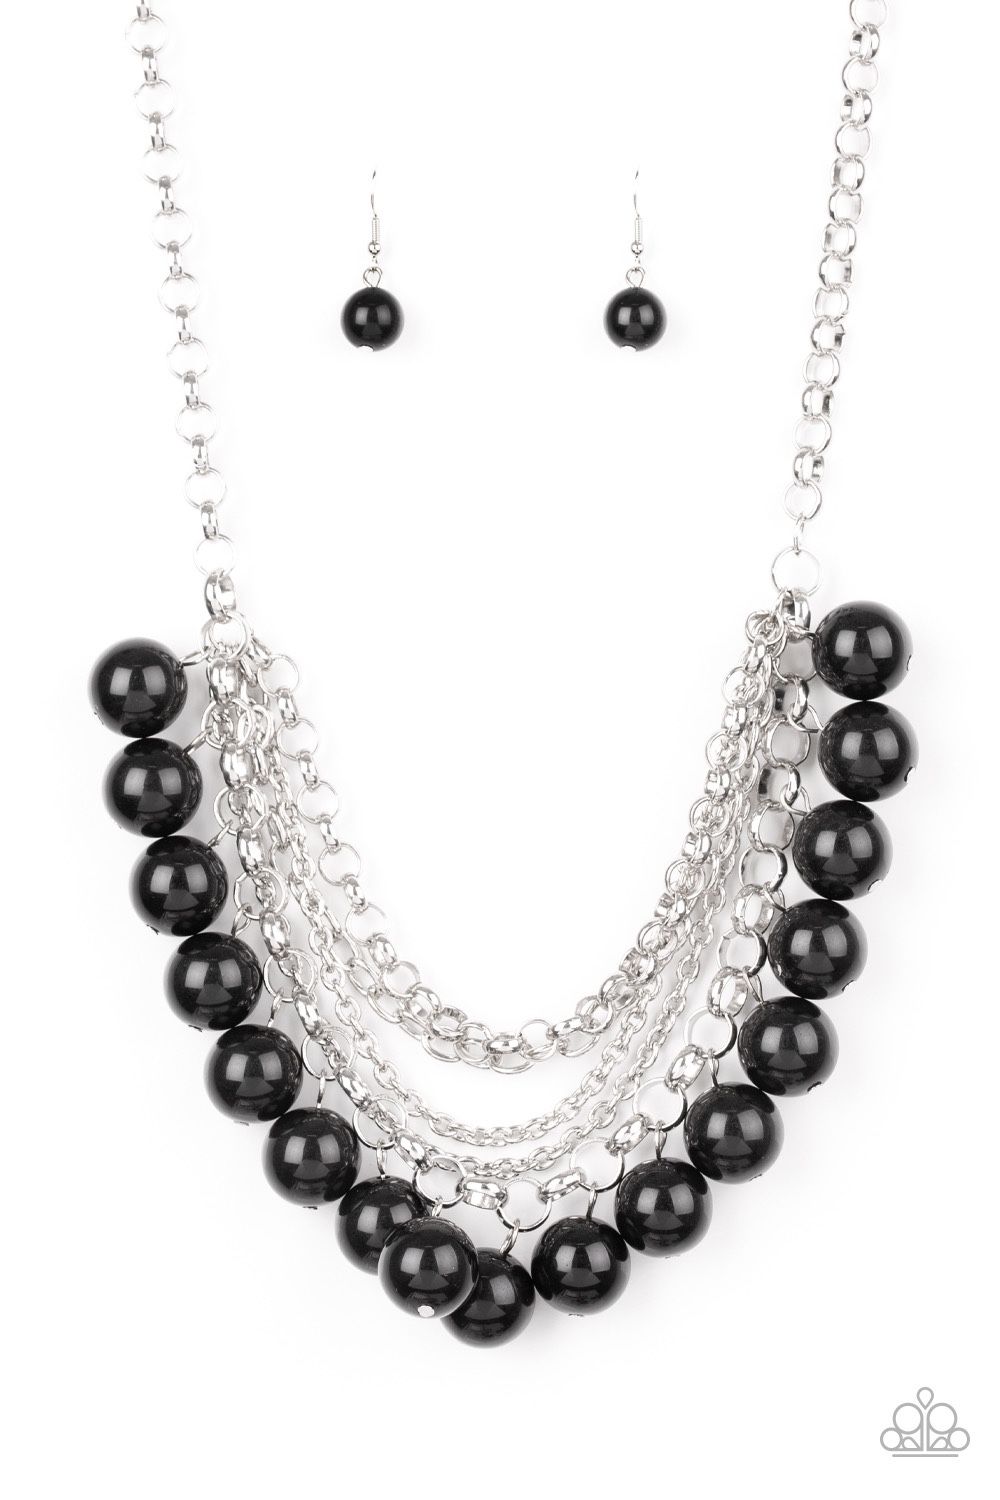 New necklace color negro and silver